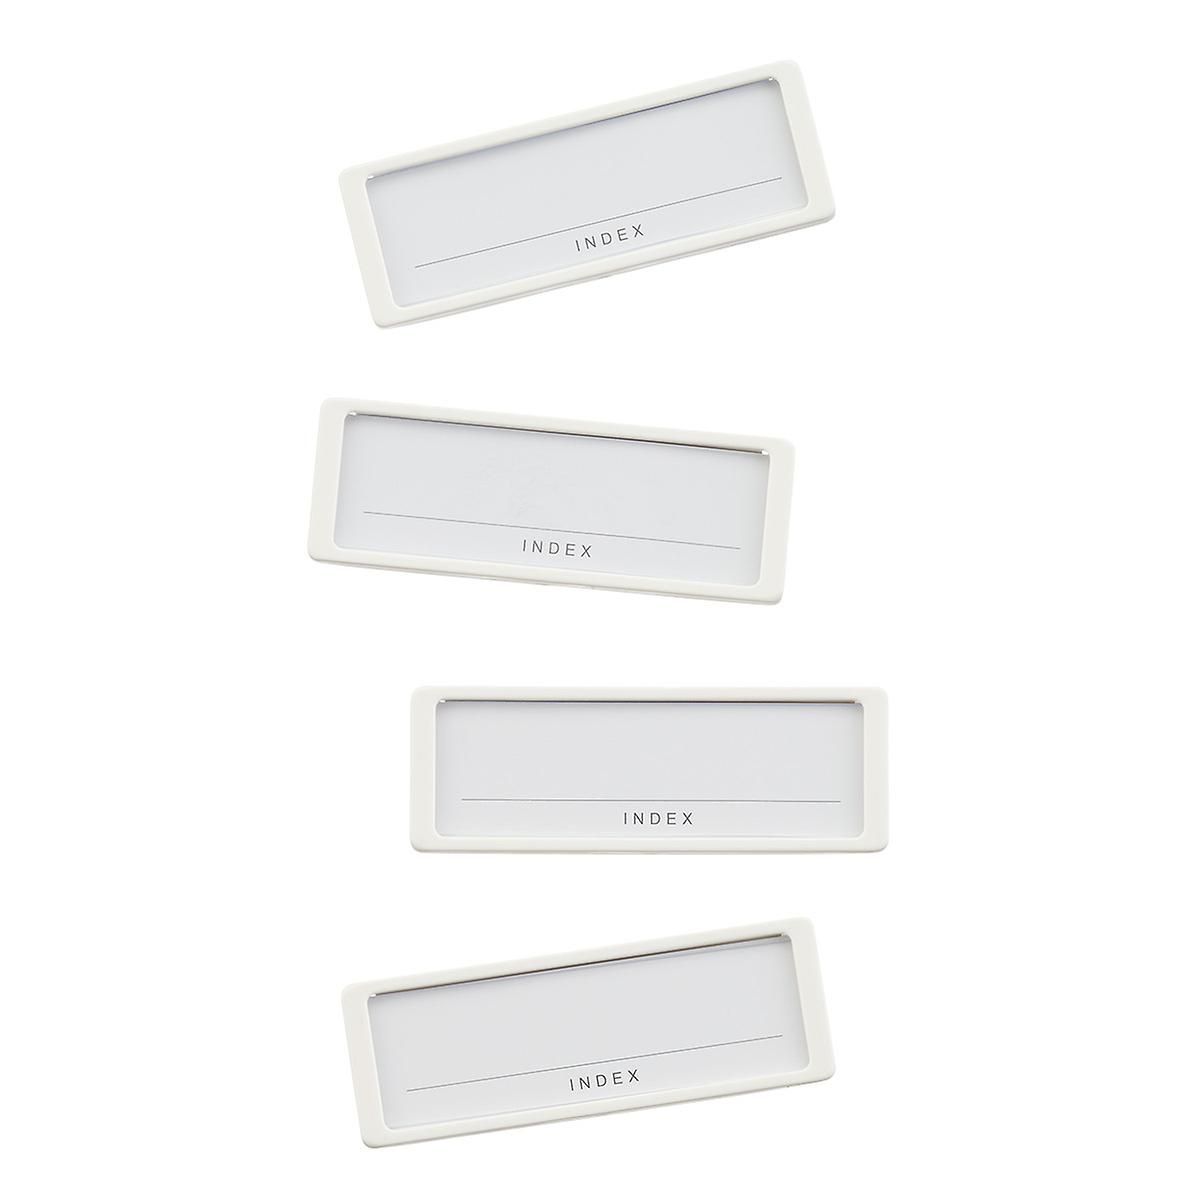 like-it Small Label Holders White Pkg/4 | The Container Store